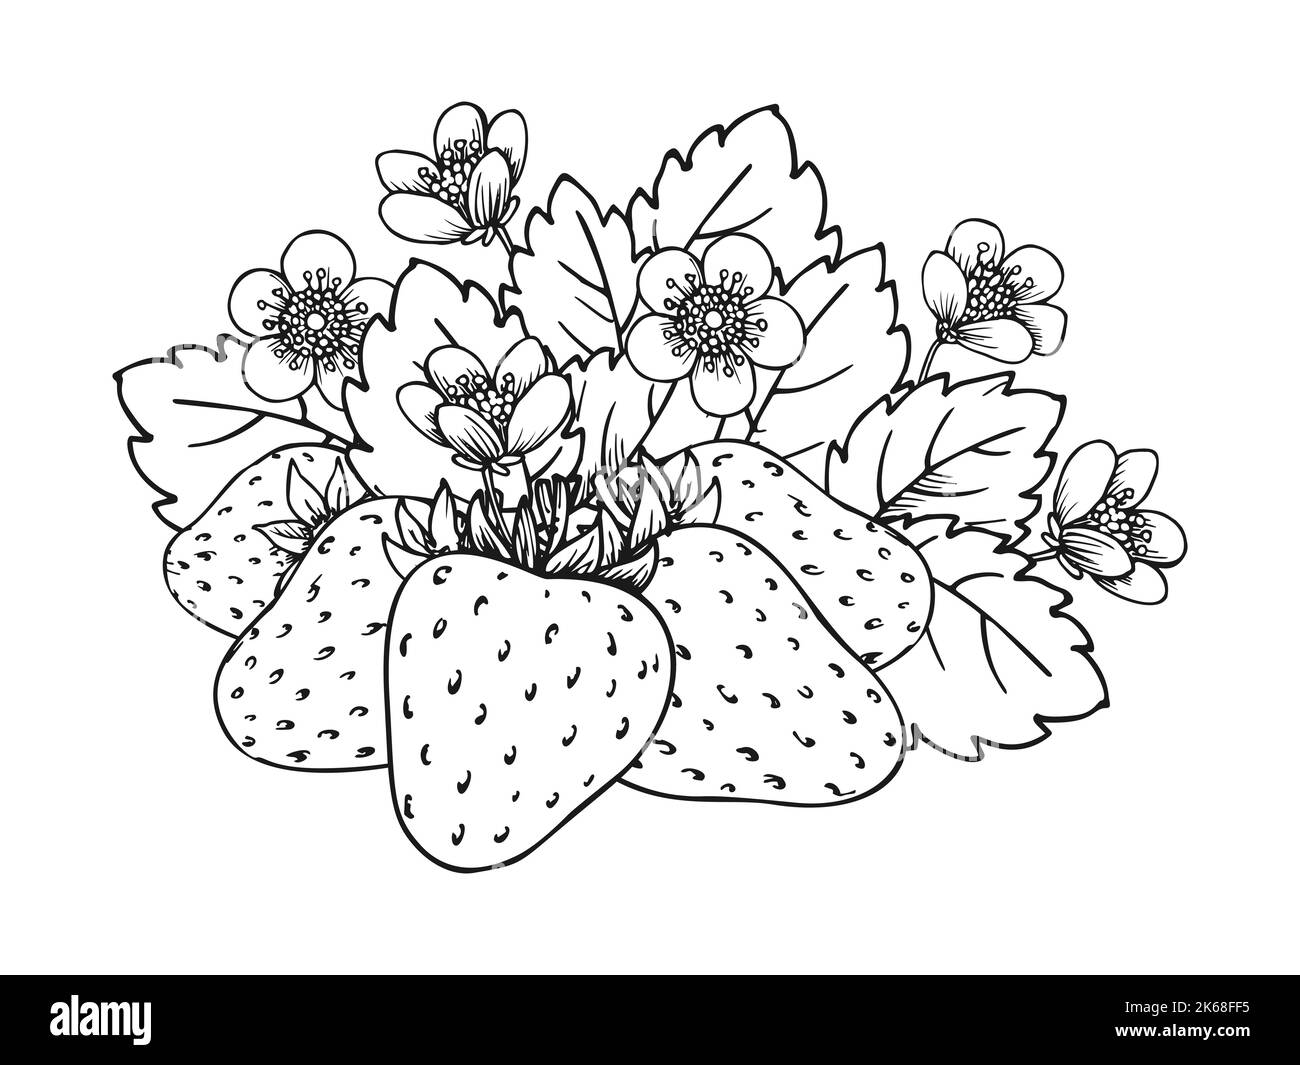 Strawberry flowering black and white sketch. Fresh ripe mellow berries flowers and leaves. Coloring book for children and adults. Wild strawberries bunch for magazine, card, menu, web pages, labels Stock Vector